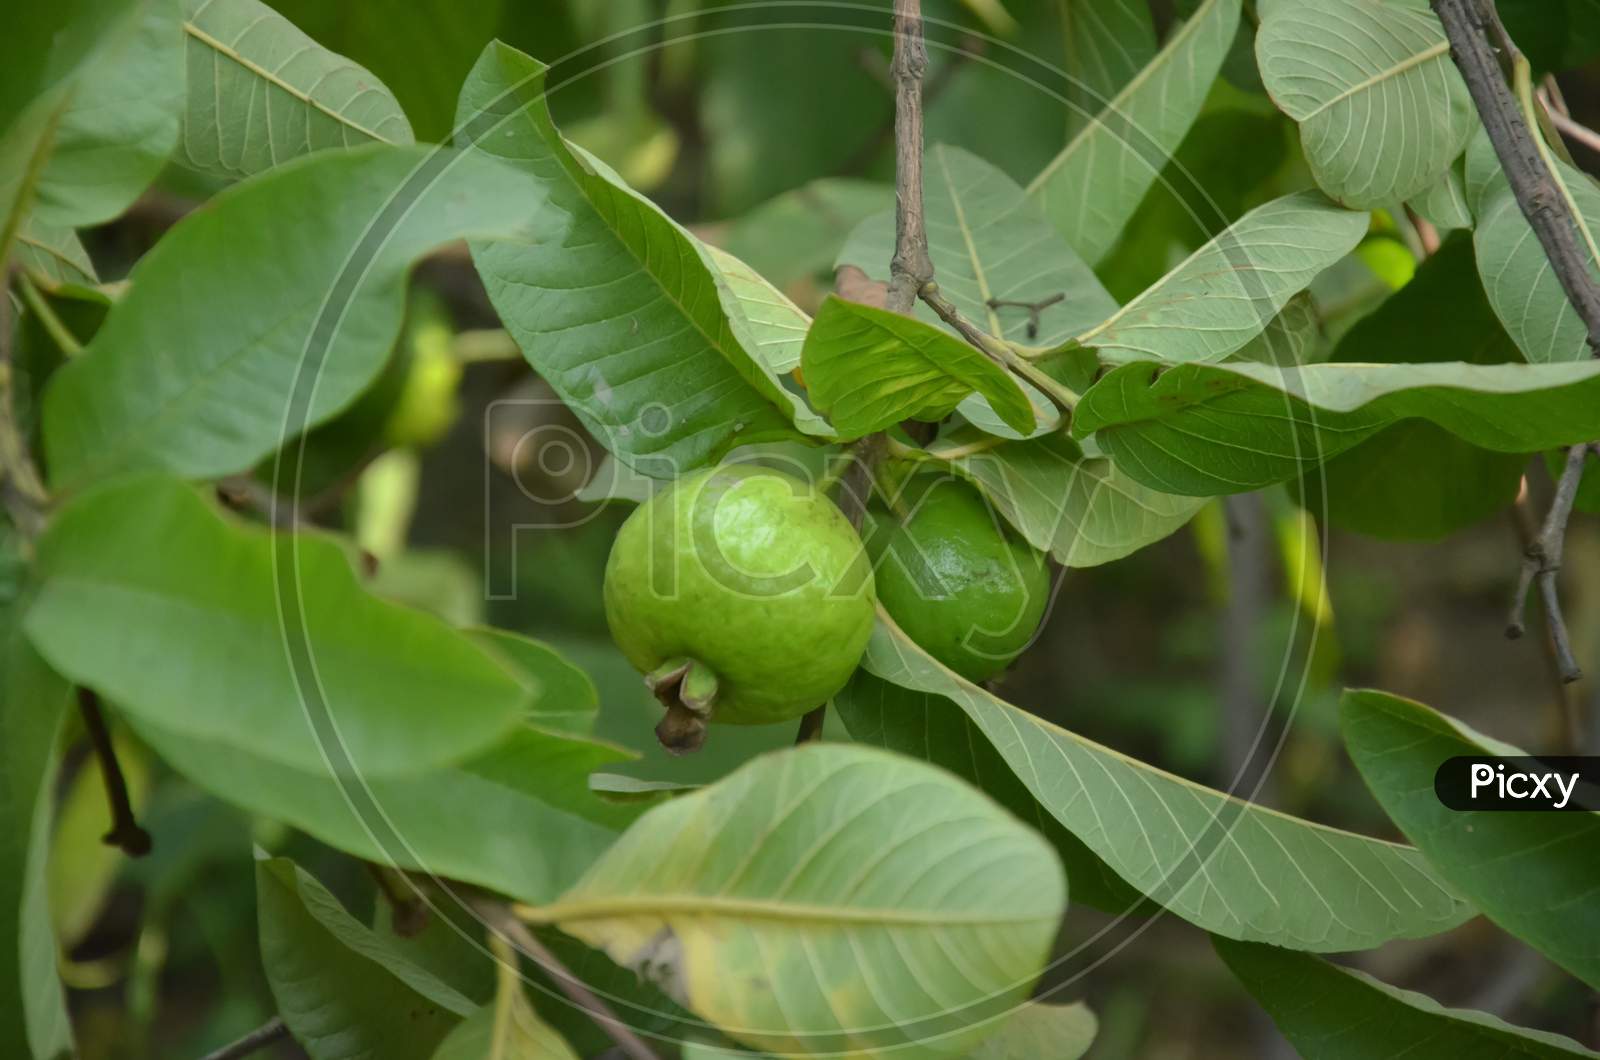 GUAVA TREE WITH FRUITS AND LEAVES.